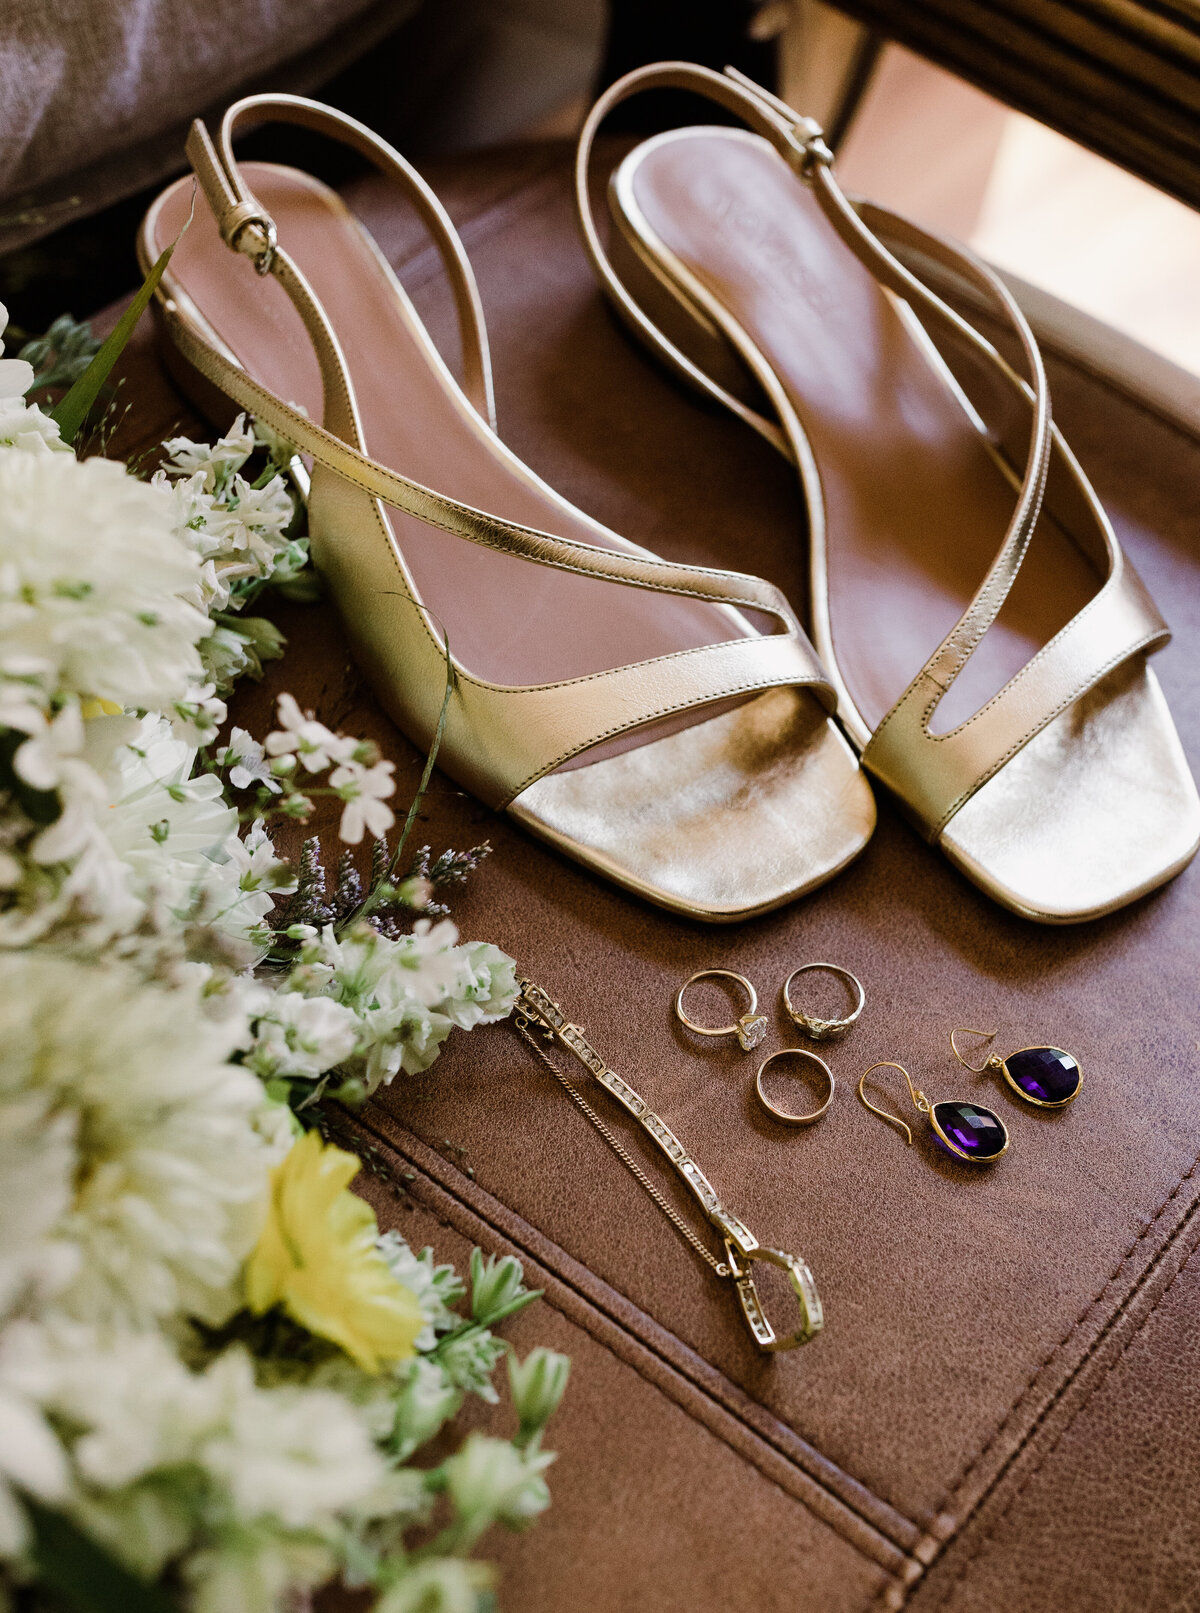 Wedding details including rings, earrings and shoes